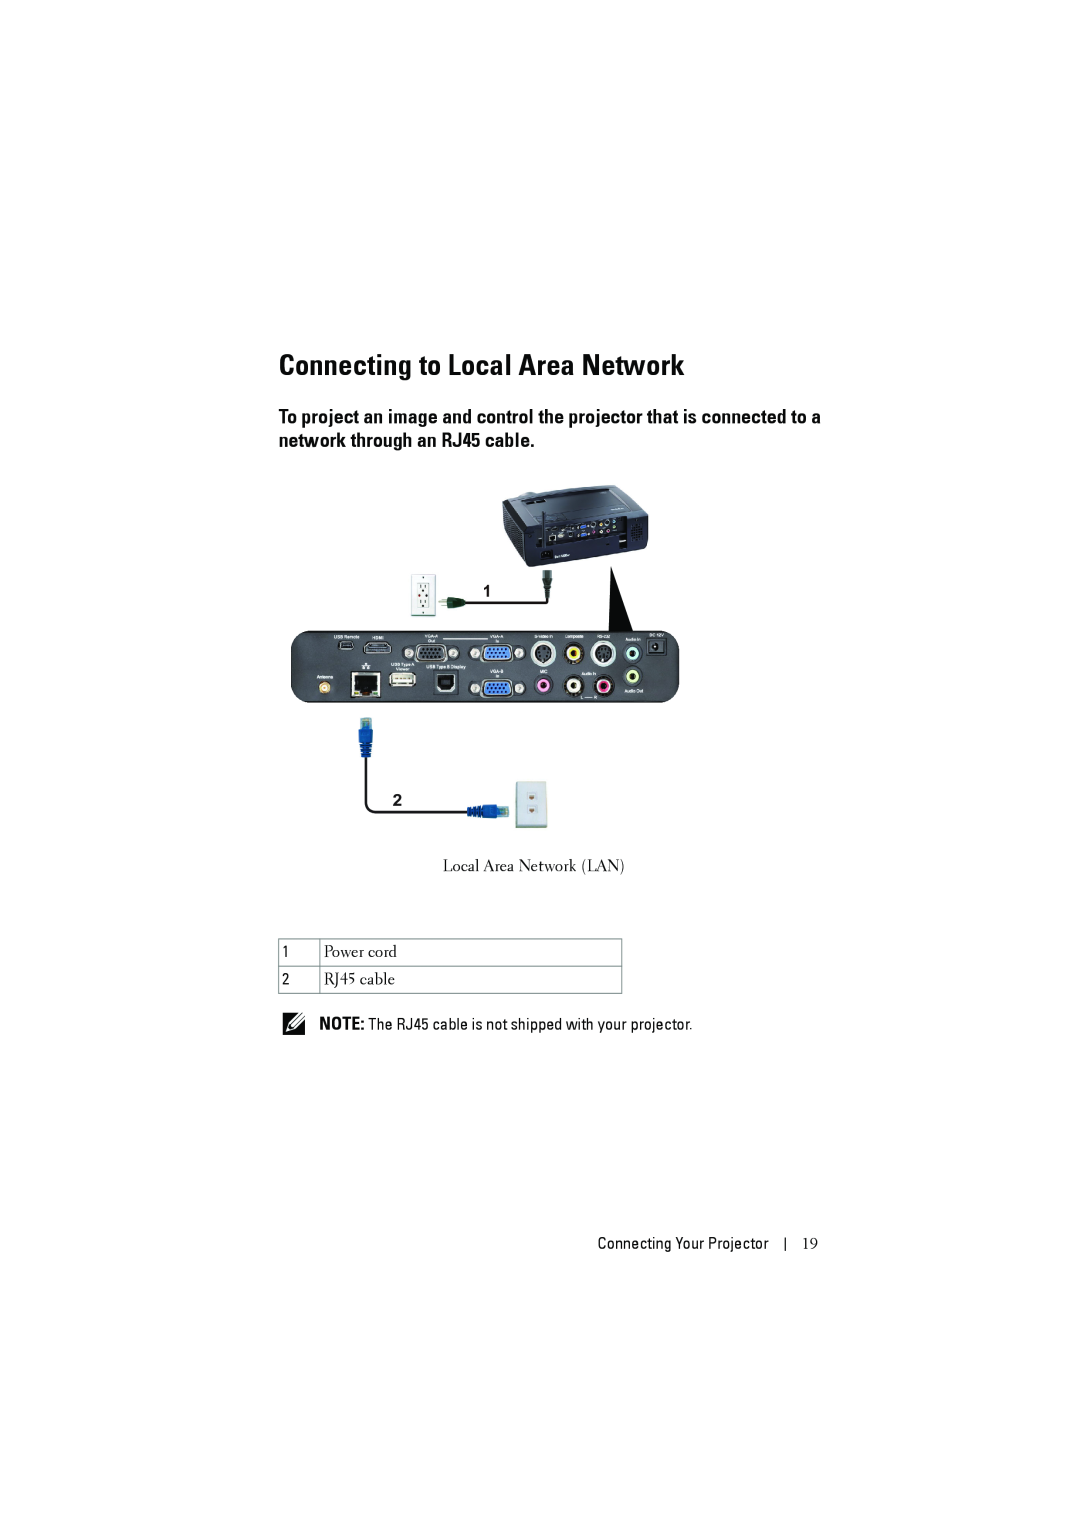 Dell S300W Connecting to Local Area Network, Local Area Network LAN 1 Power cord 2 RJ45 cable, Connecting Your Projector 